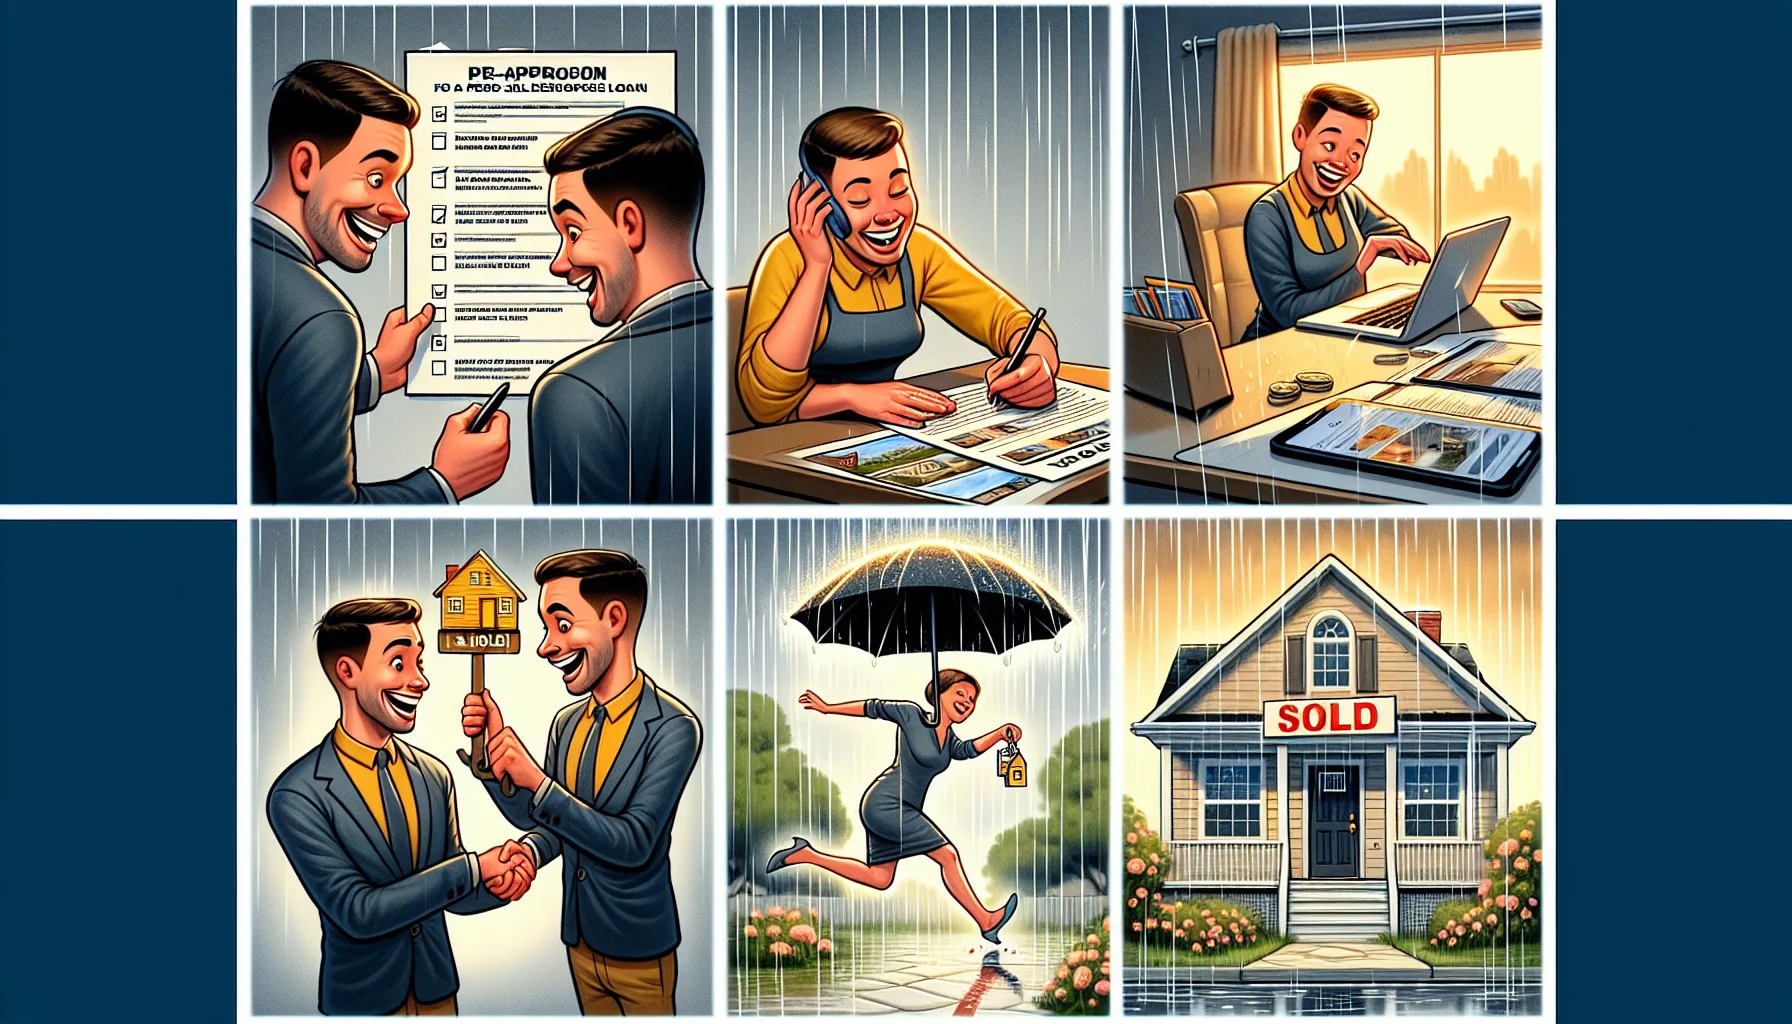 A humorous, realistic image displaying the steps for a first-time home buyer in the best possible real estate situation. Picture one: an eager buyer signing a pre-approval for a house loan with a wide smile. Picture two: the same person looking over a list of potential properties online, a glow on their face. Picture three: them hoisting an umbrella as they briskly walk through the rain to view a charming house. Picture four: a congratulatory handshake with an agent under a 'Sold' sign, joy evident on their faces. Final picture: the same person, keys in hand, gleefully stepping into their new home.